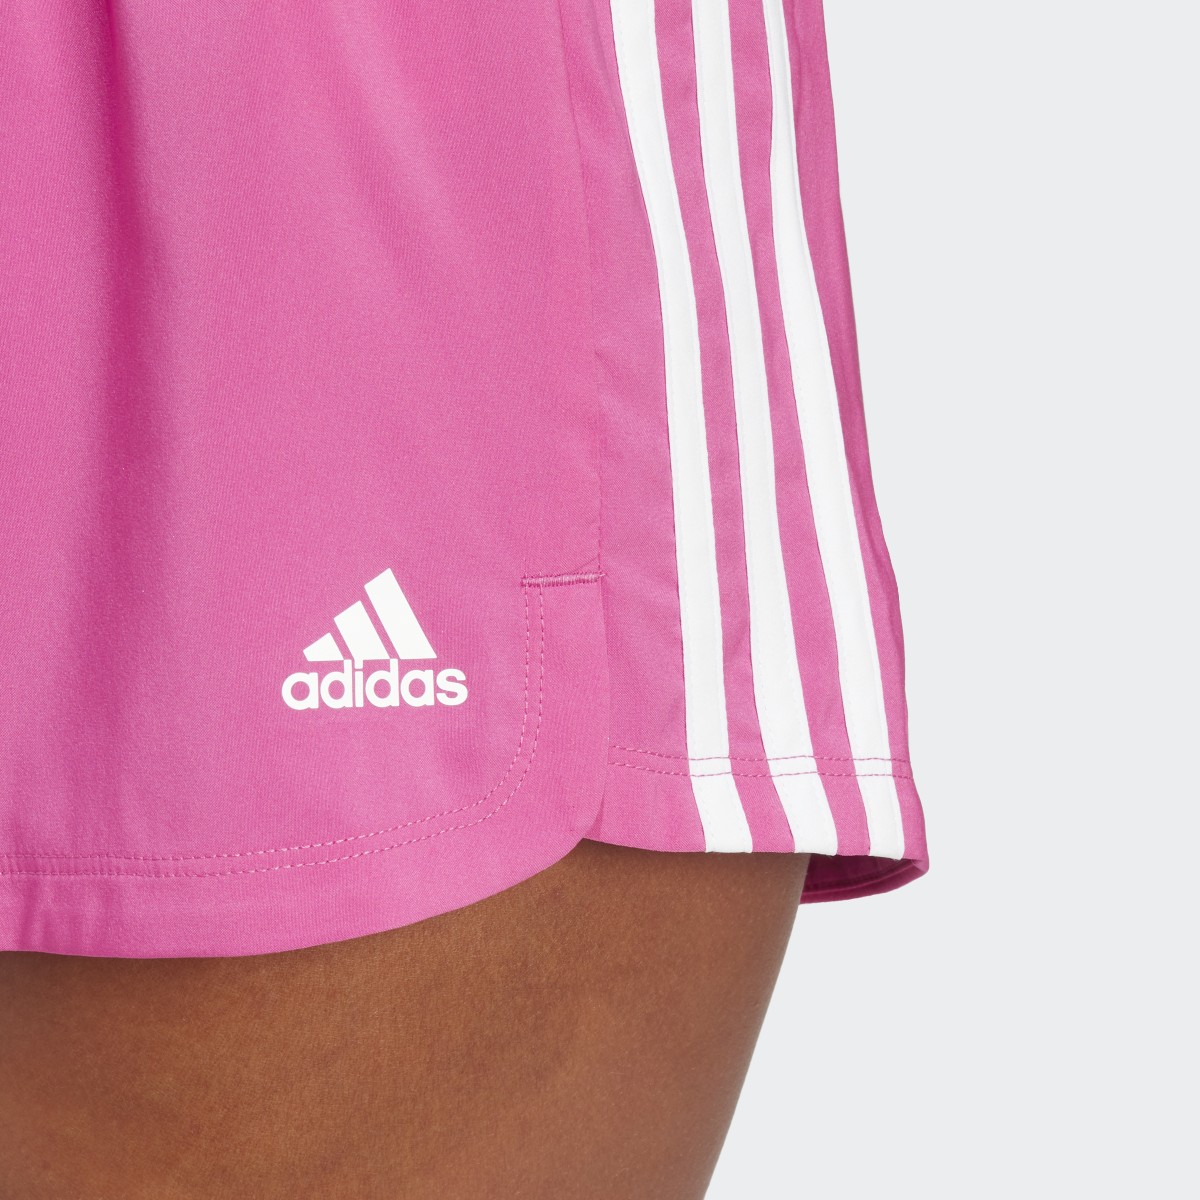 Adidas Pacer 3-Stripes Woven Shorts. 5